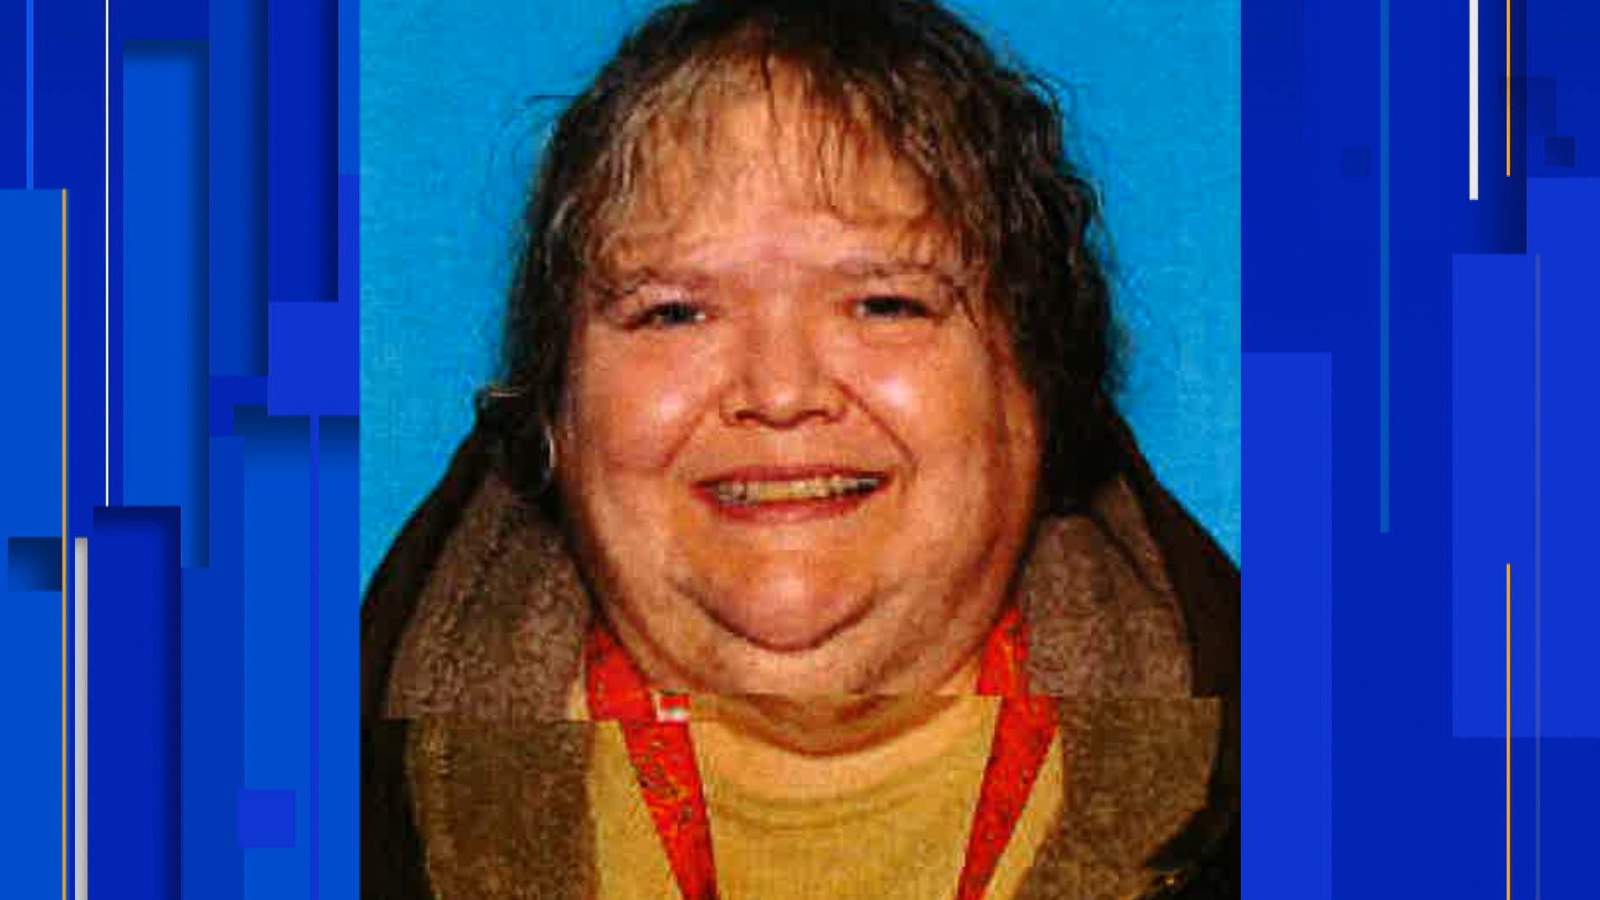 Detroit police looking for missing 64-year-old woman